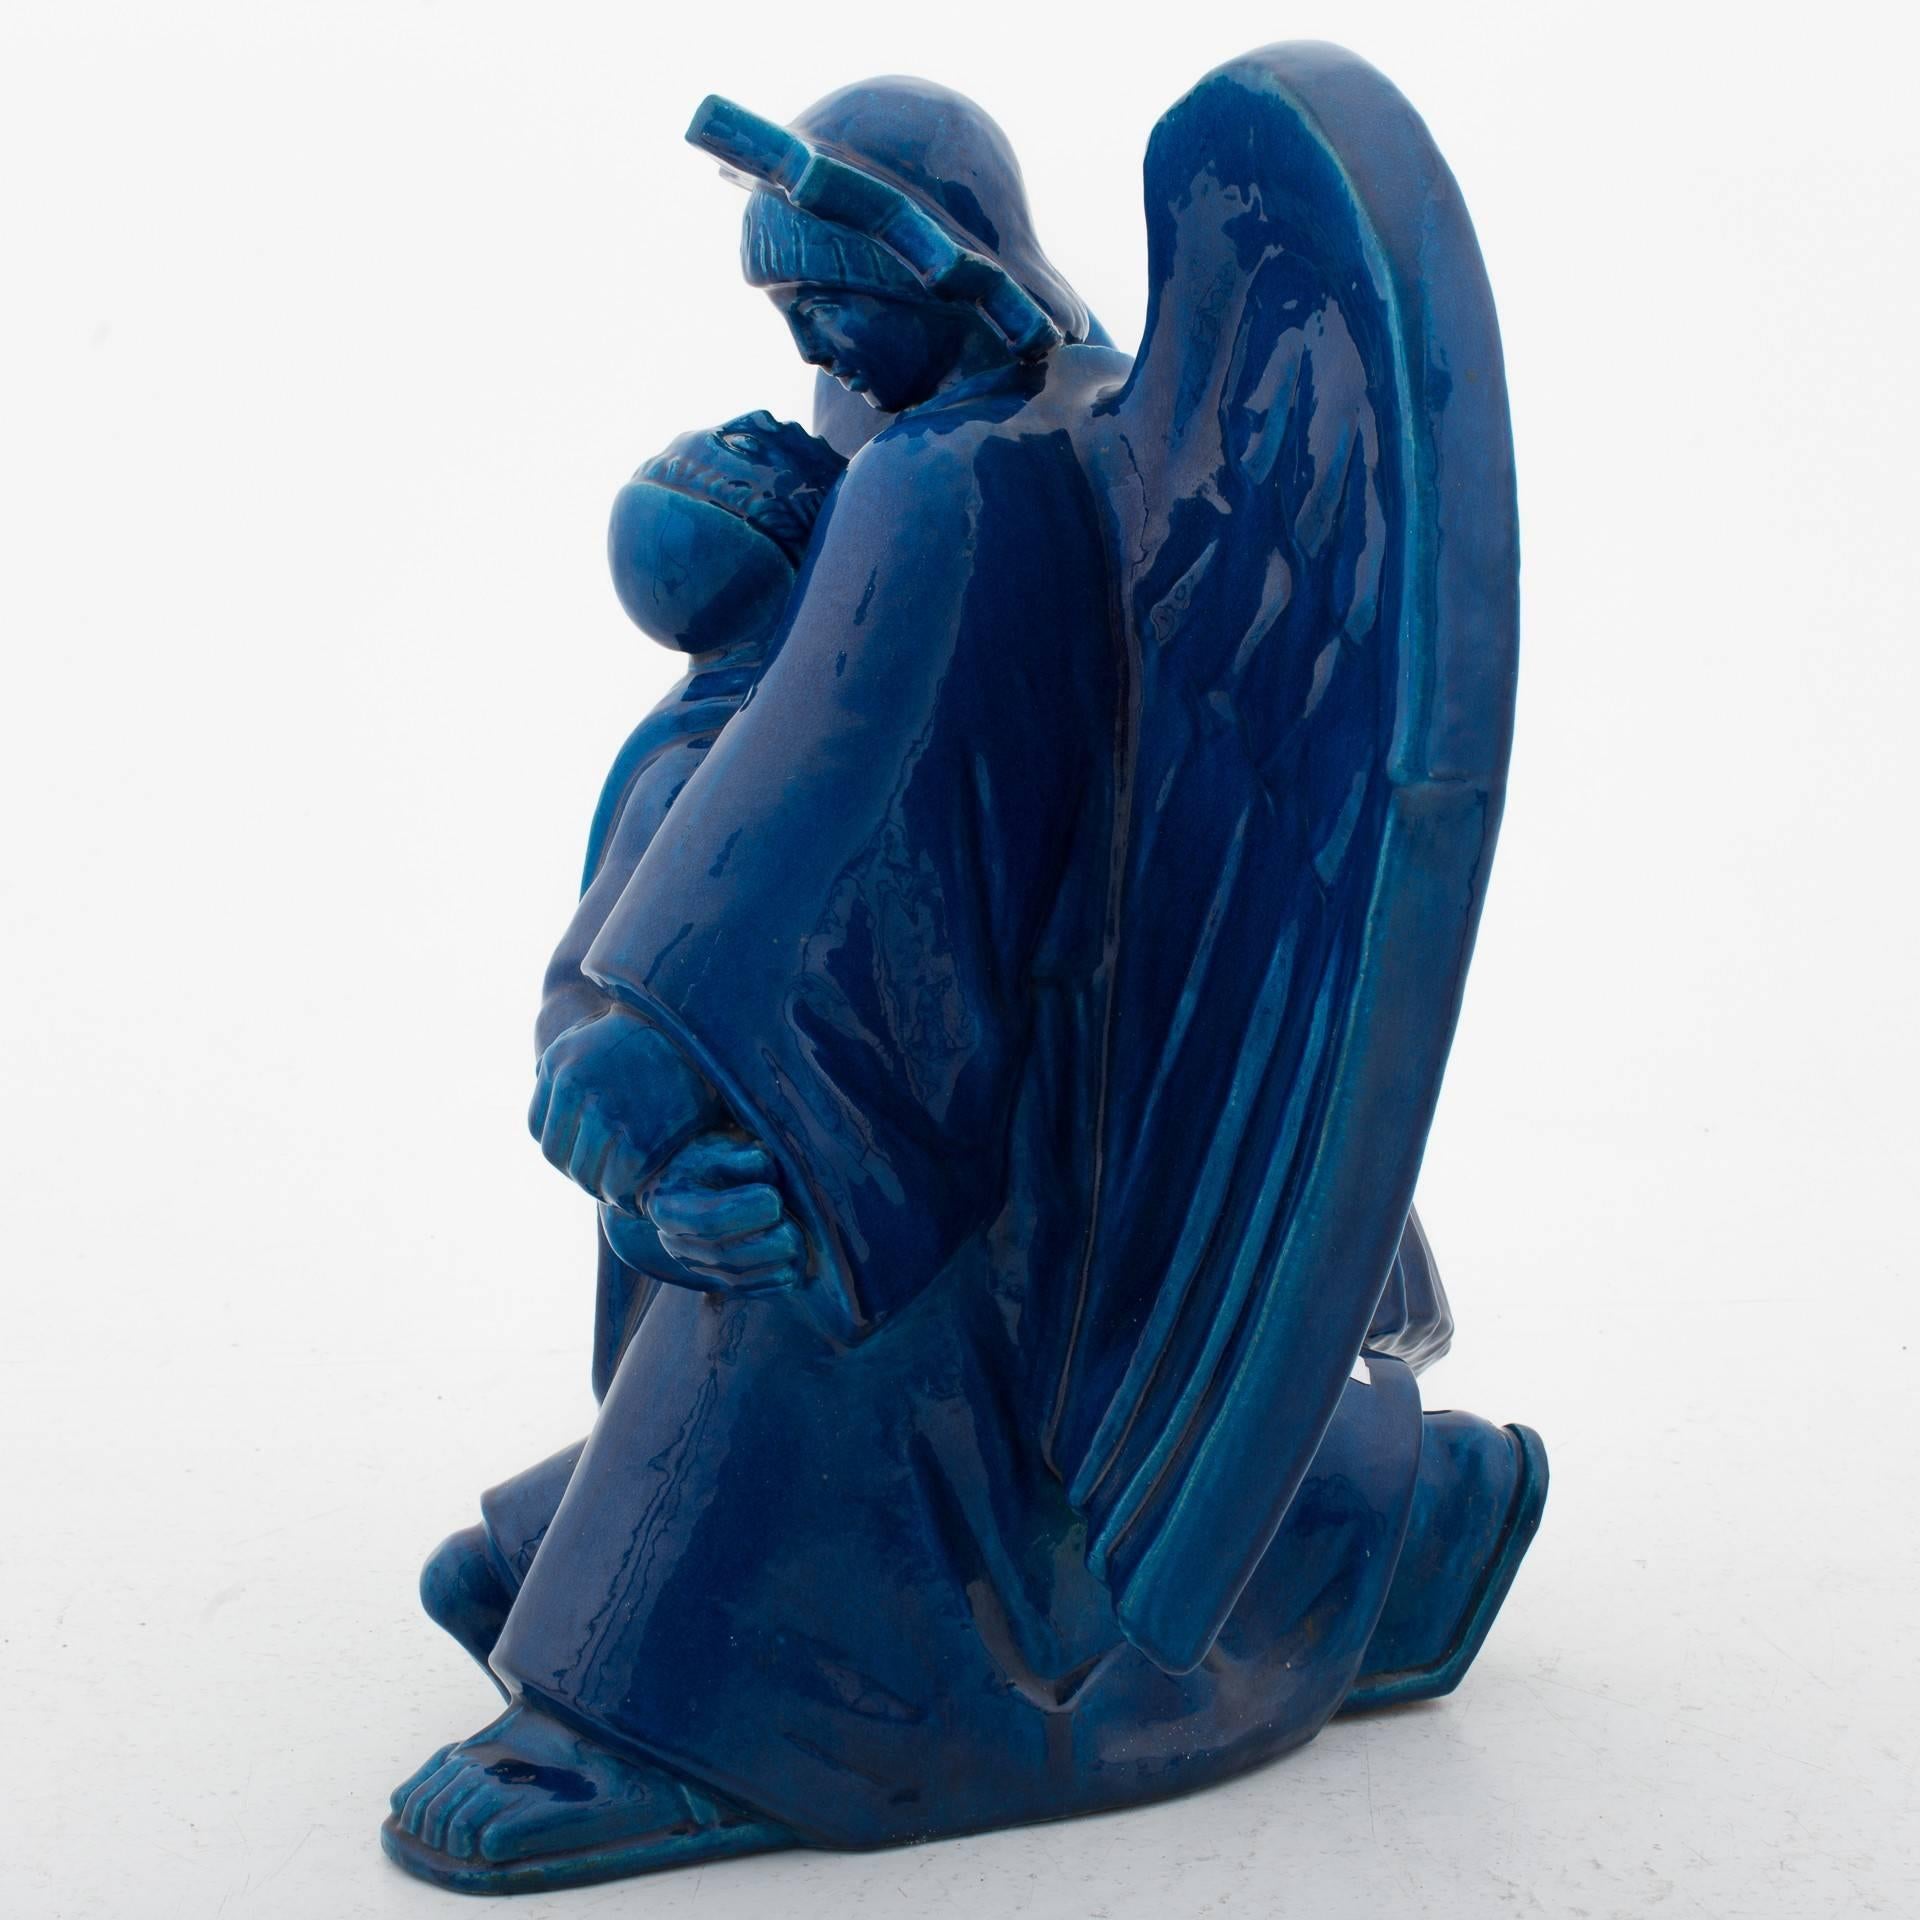 Religious figure in blue-stained stoneware. 